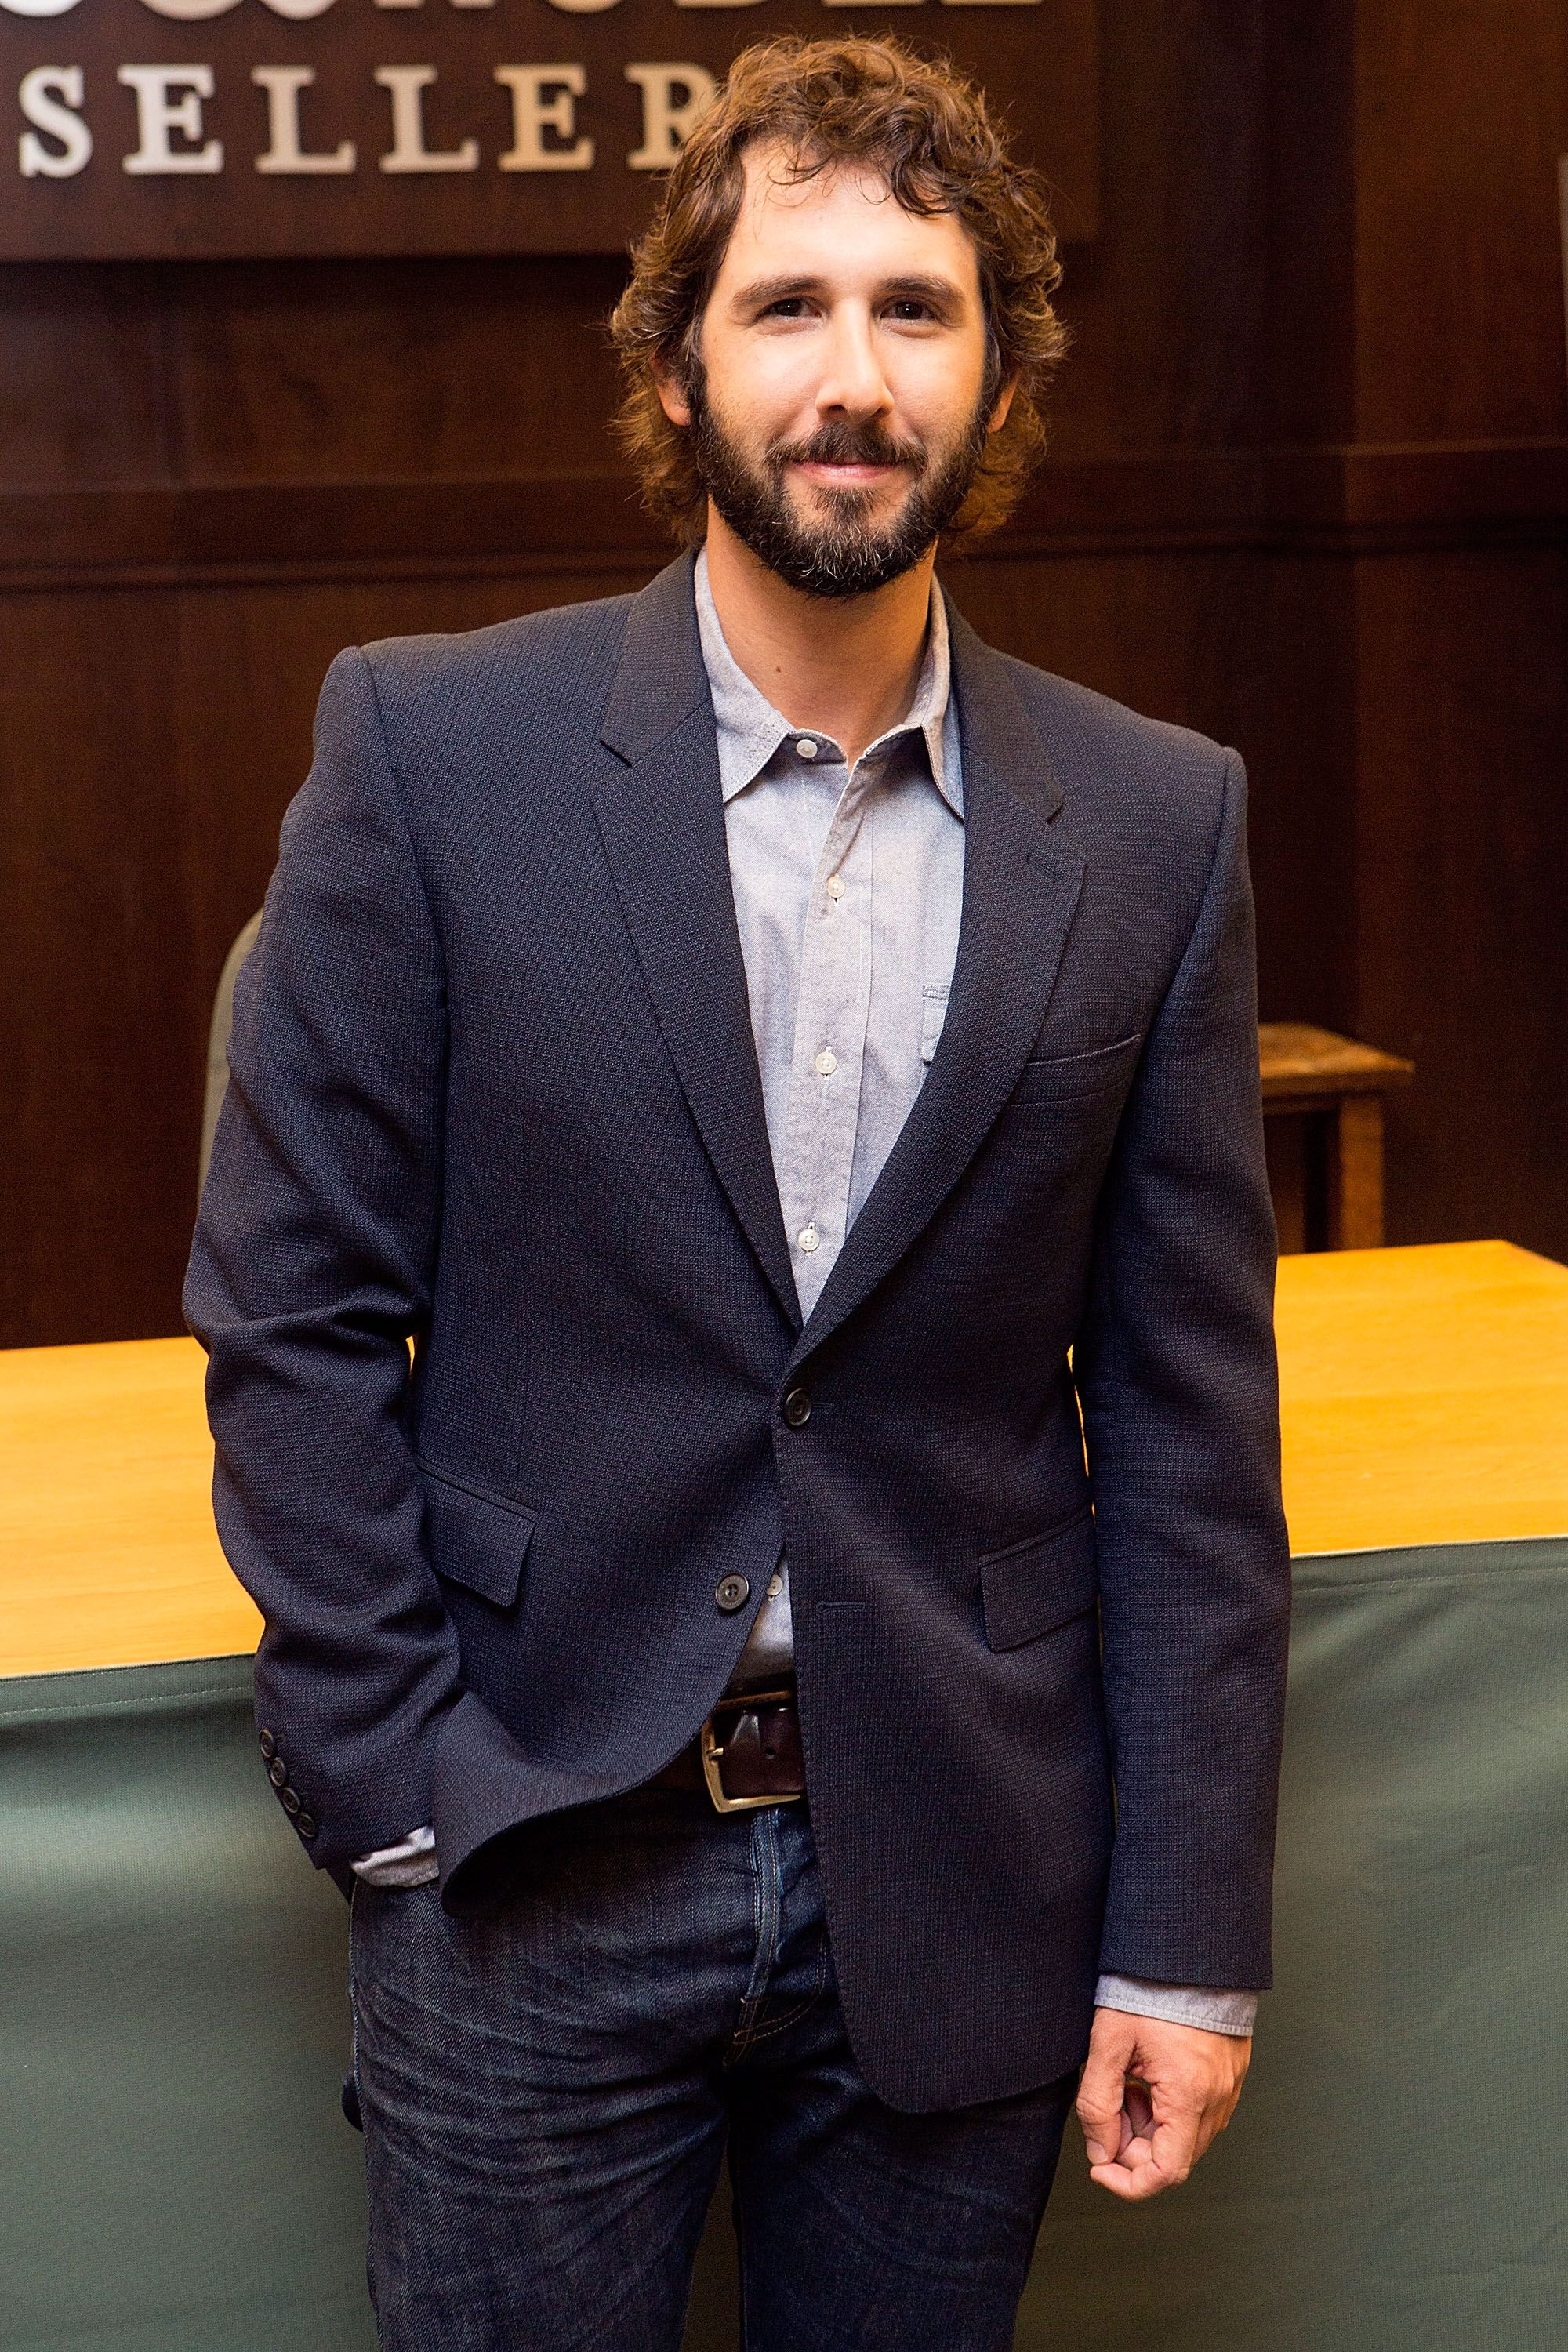 Josh Groban signs copies of his new album "Stages" at Barnes & Noble bookstore on May 8, 2015, in Los Angeles, California | Source: Getty Images